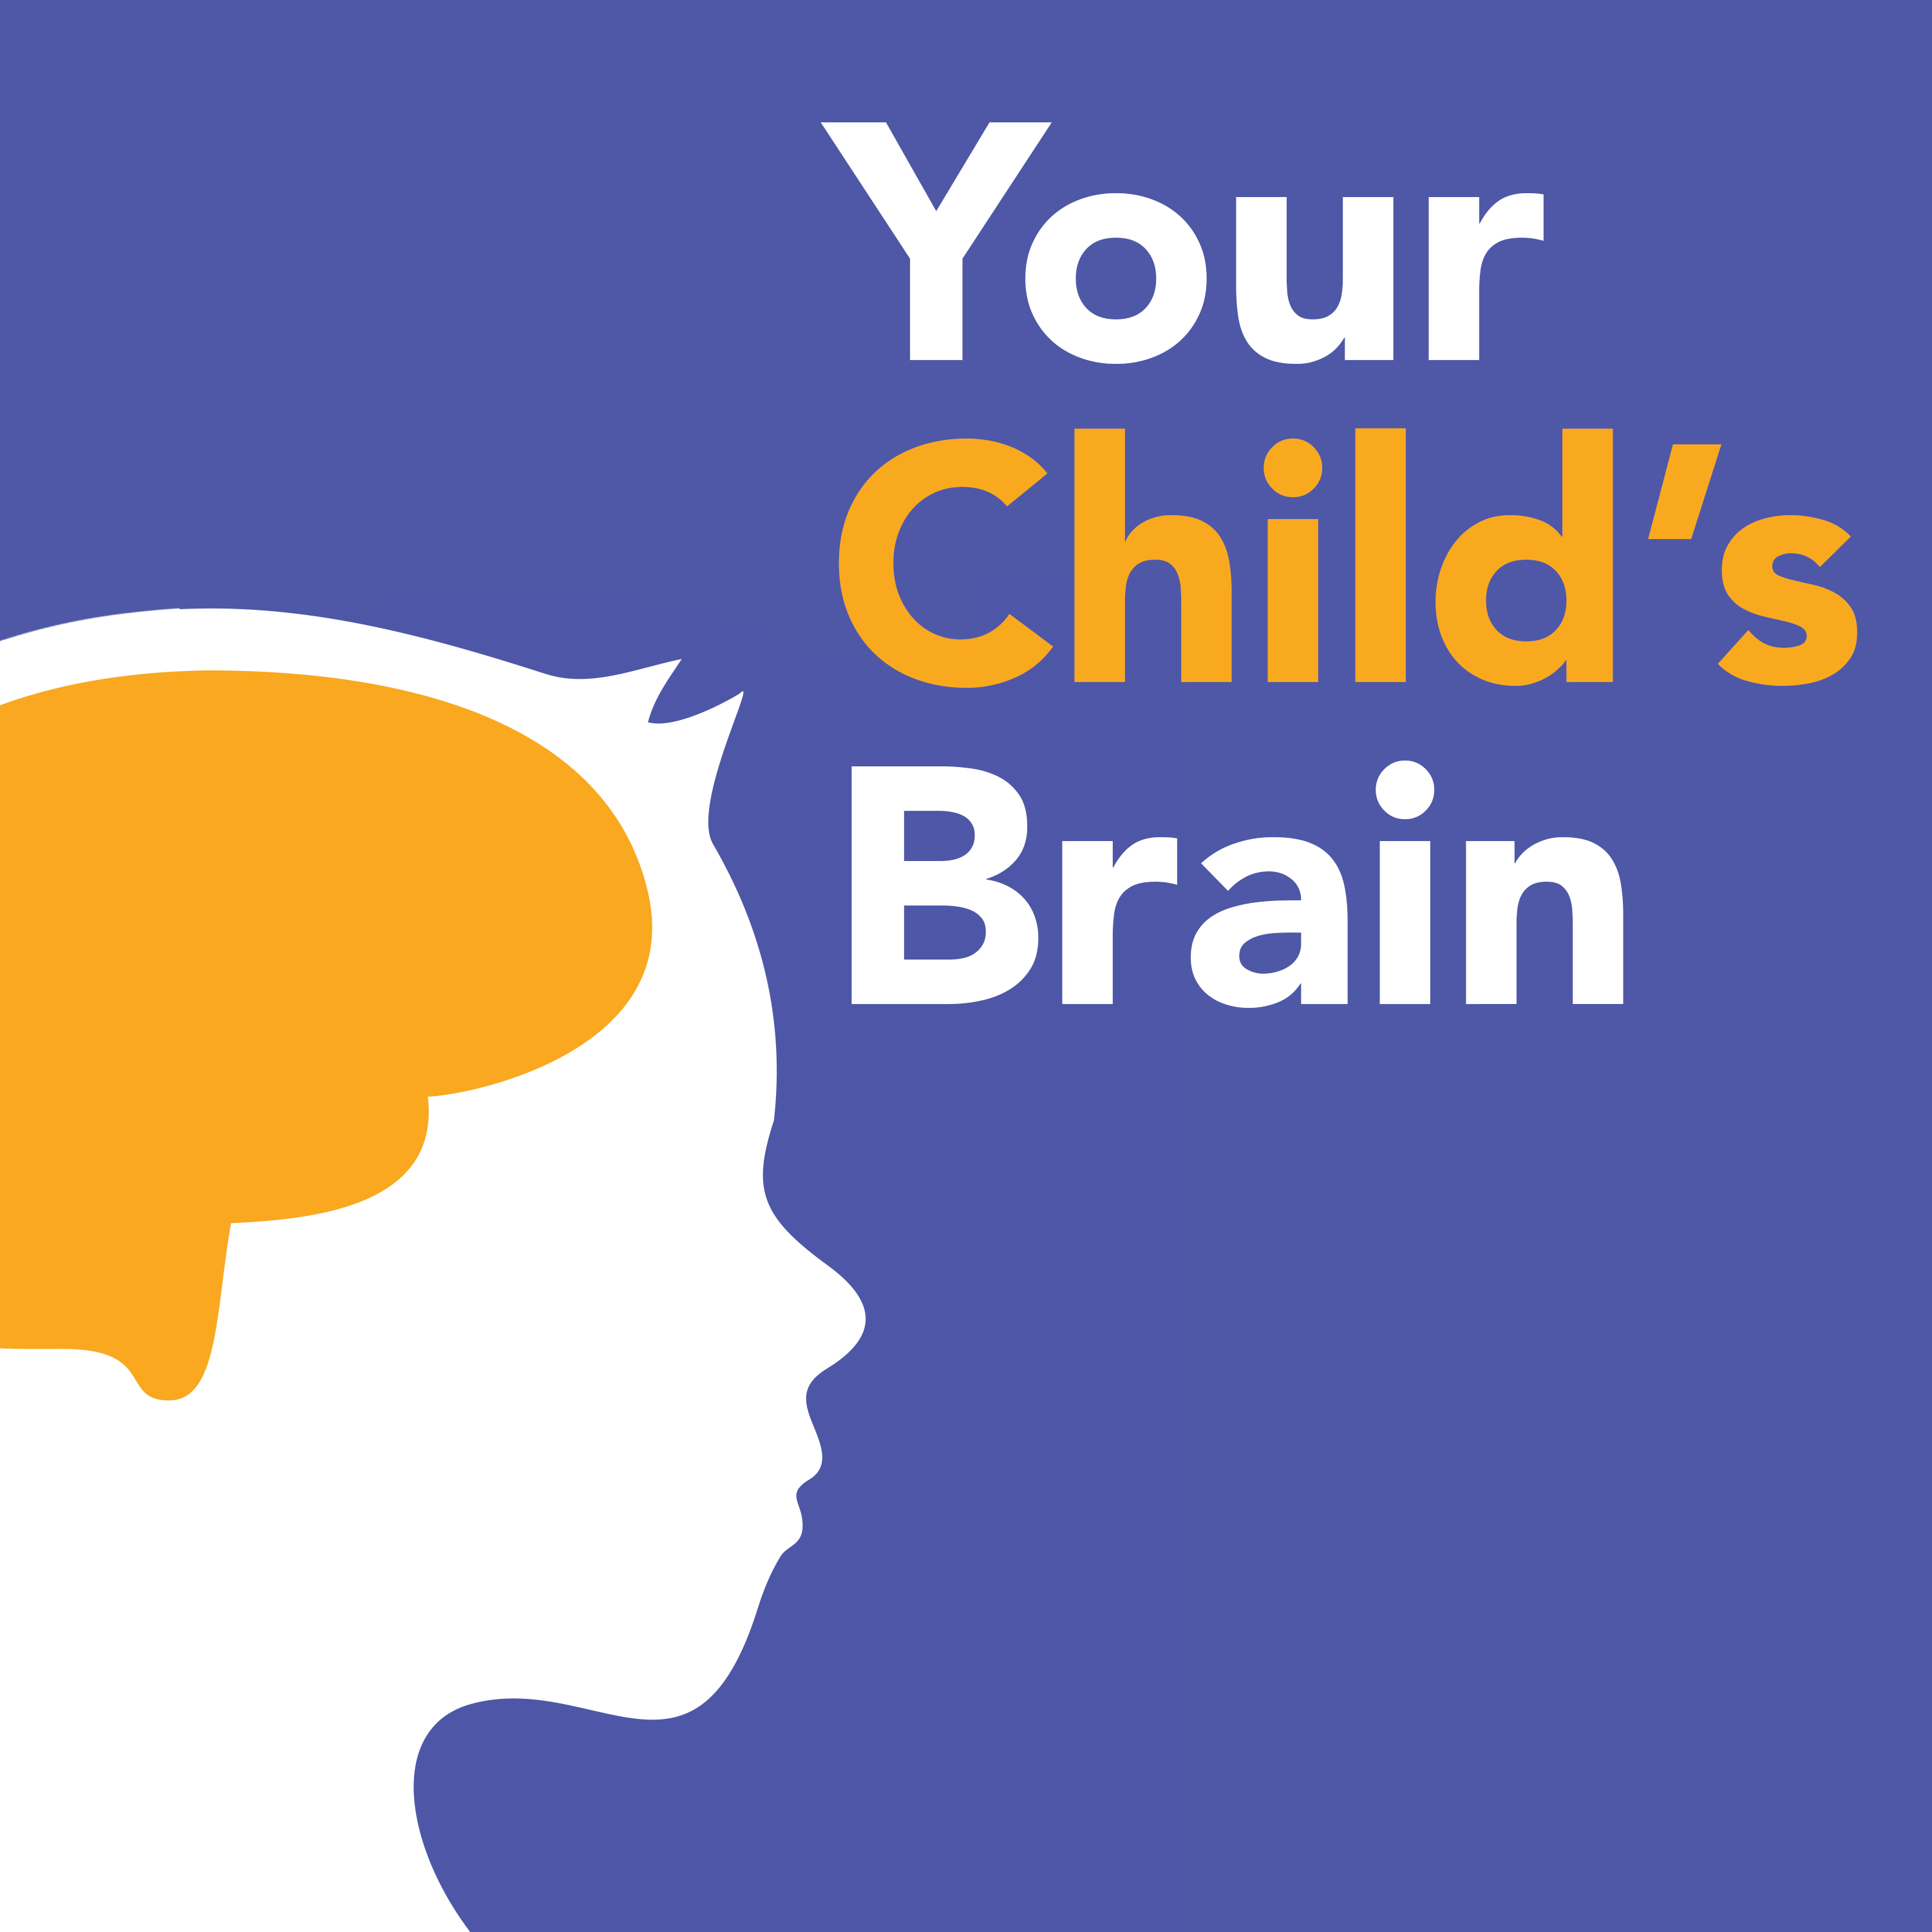 Reflecting on Progress: 30 Episodes of Insights into Your Child's Brain